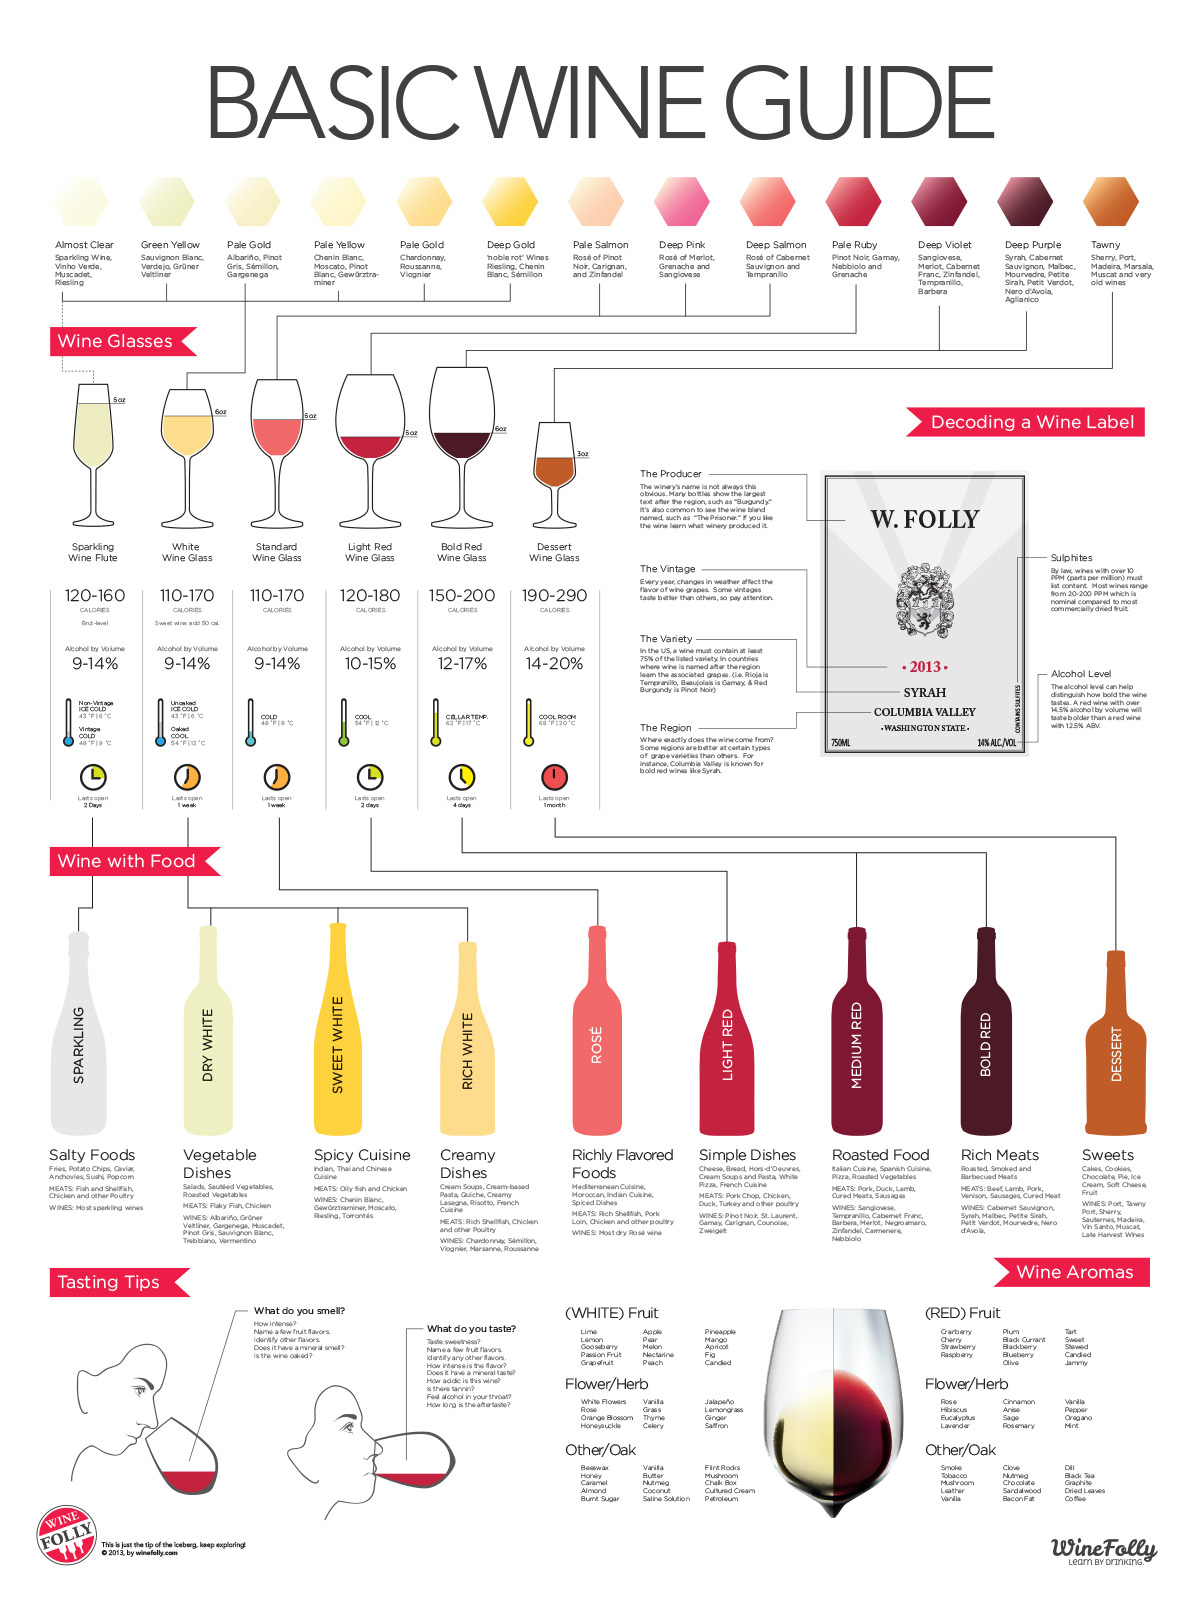 Basic Wine Guide by Wine Folly